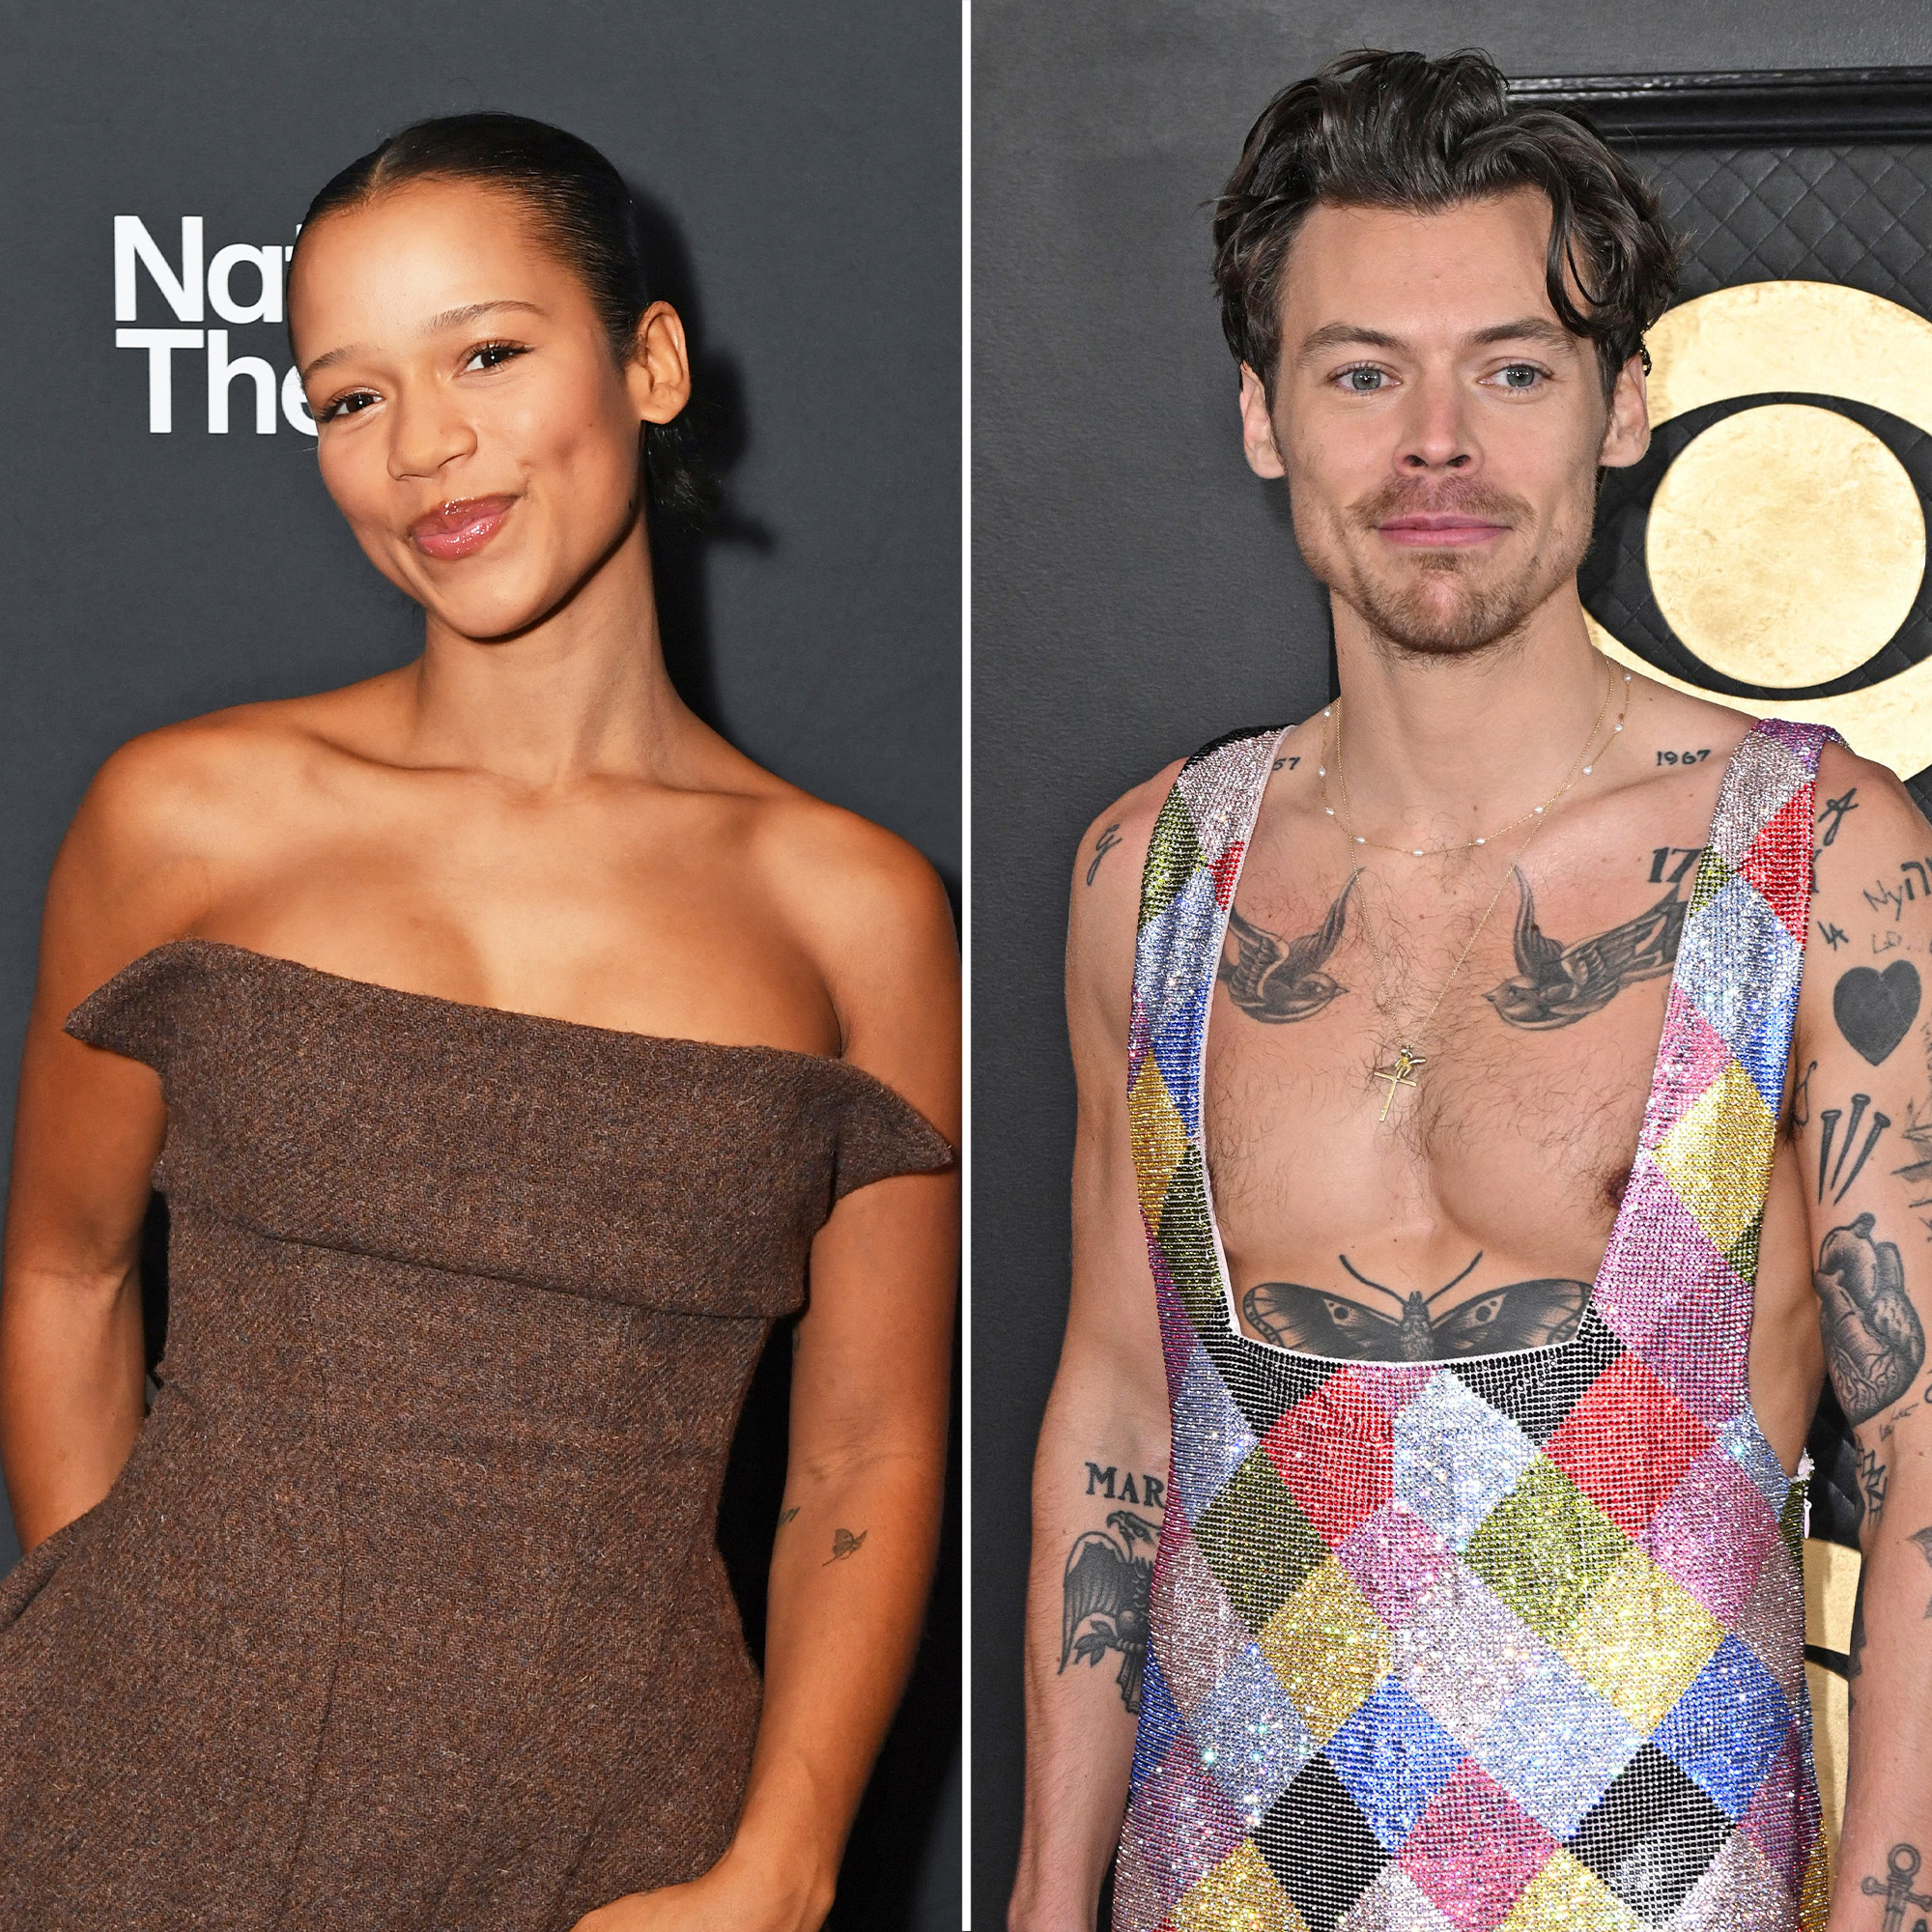 Who Is Taylor Russell? - Meet Harry Styles' Girlfriend